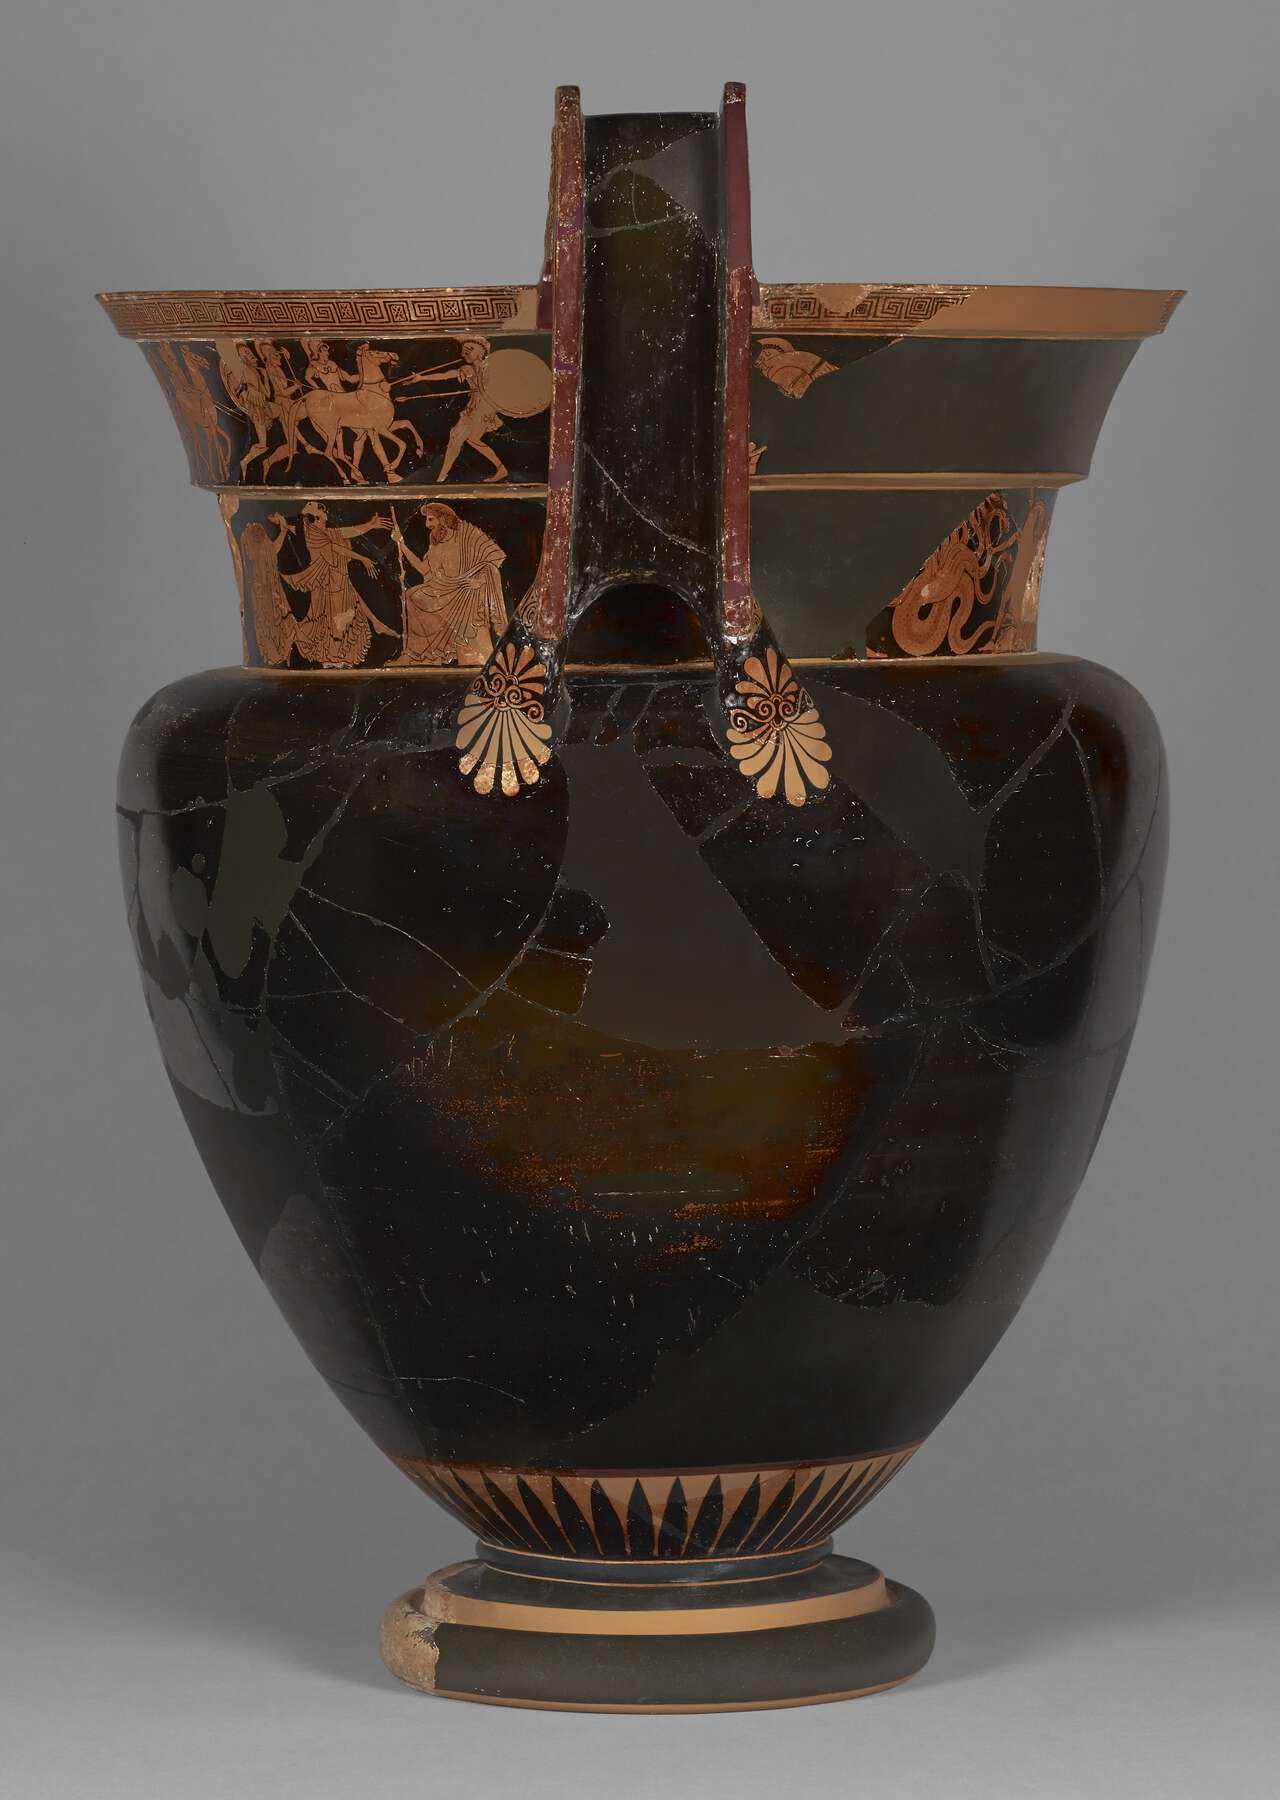 The other side of the restored vase